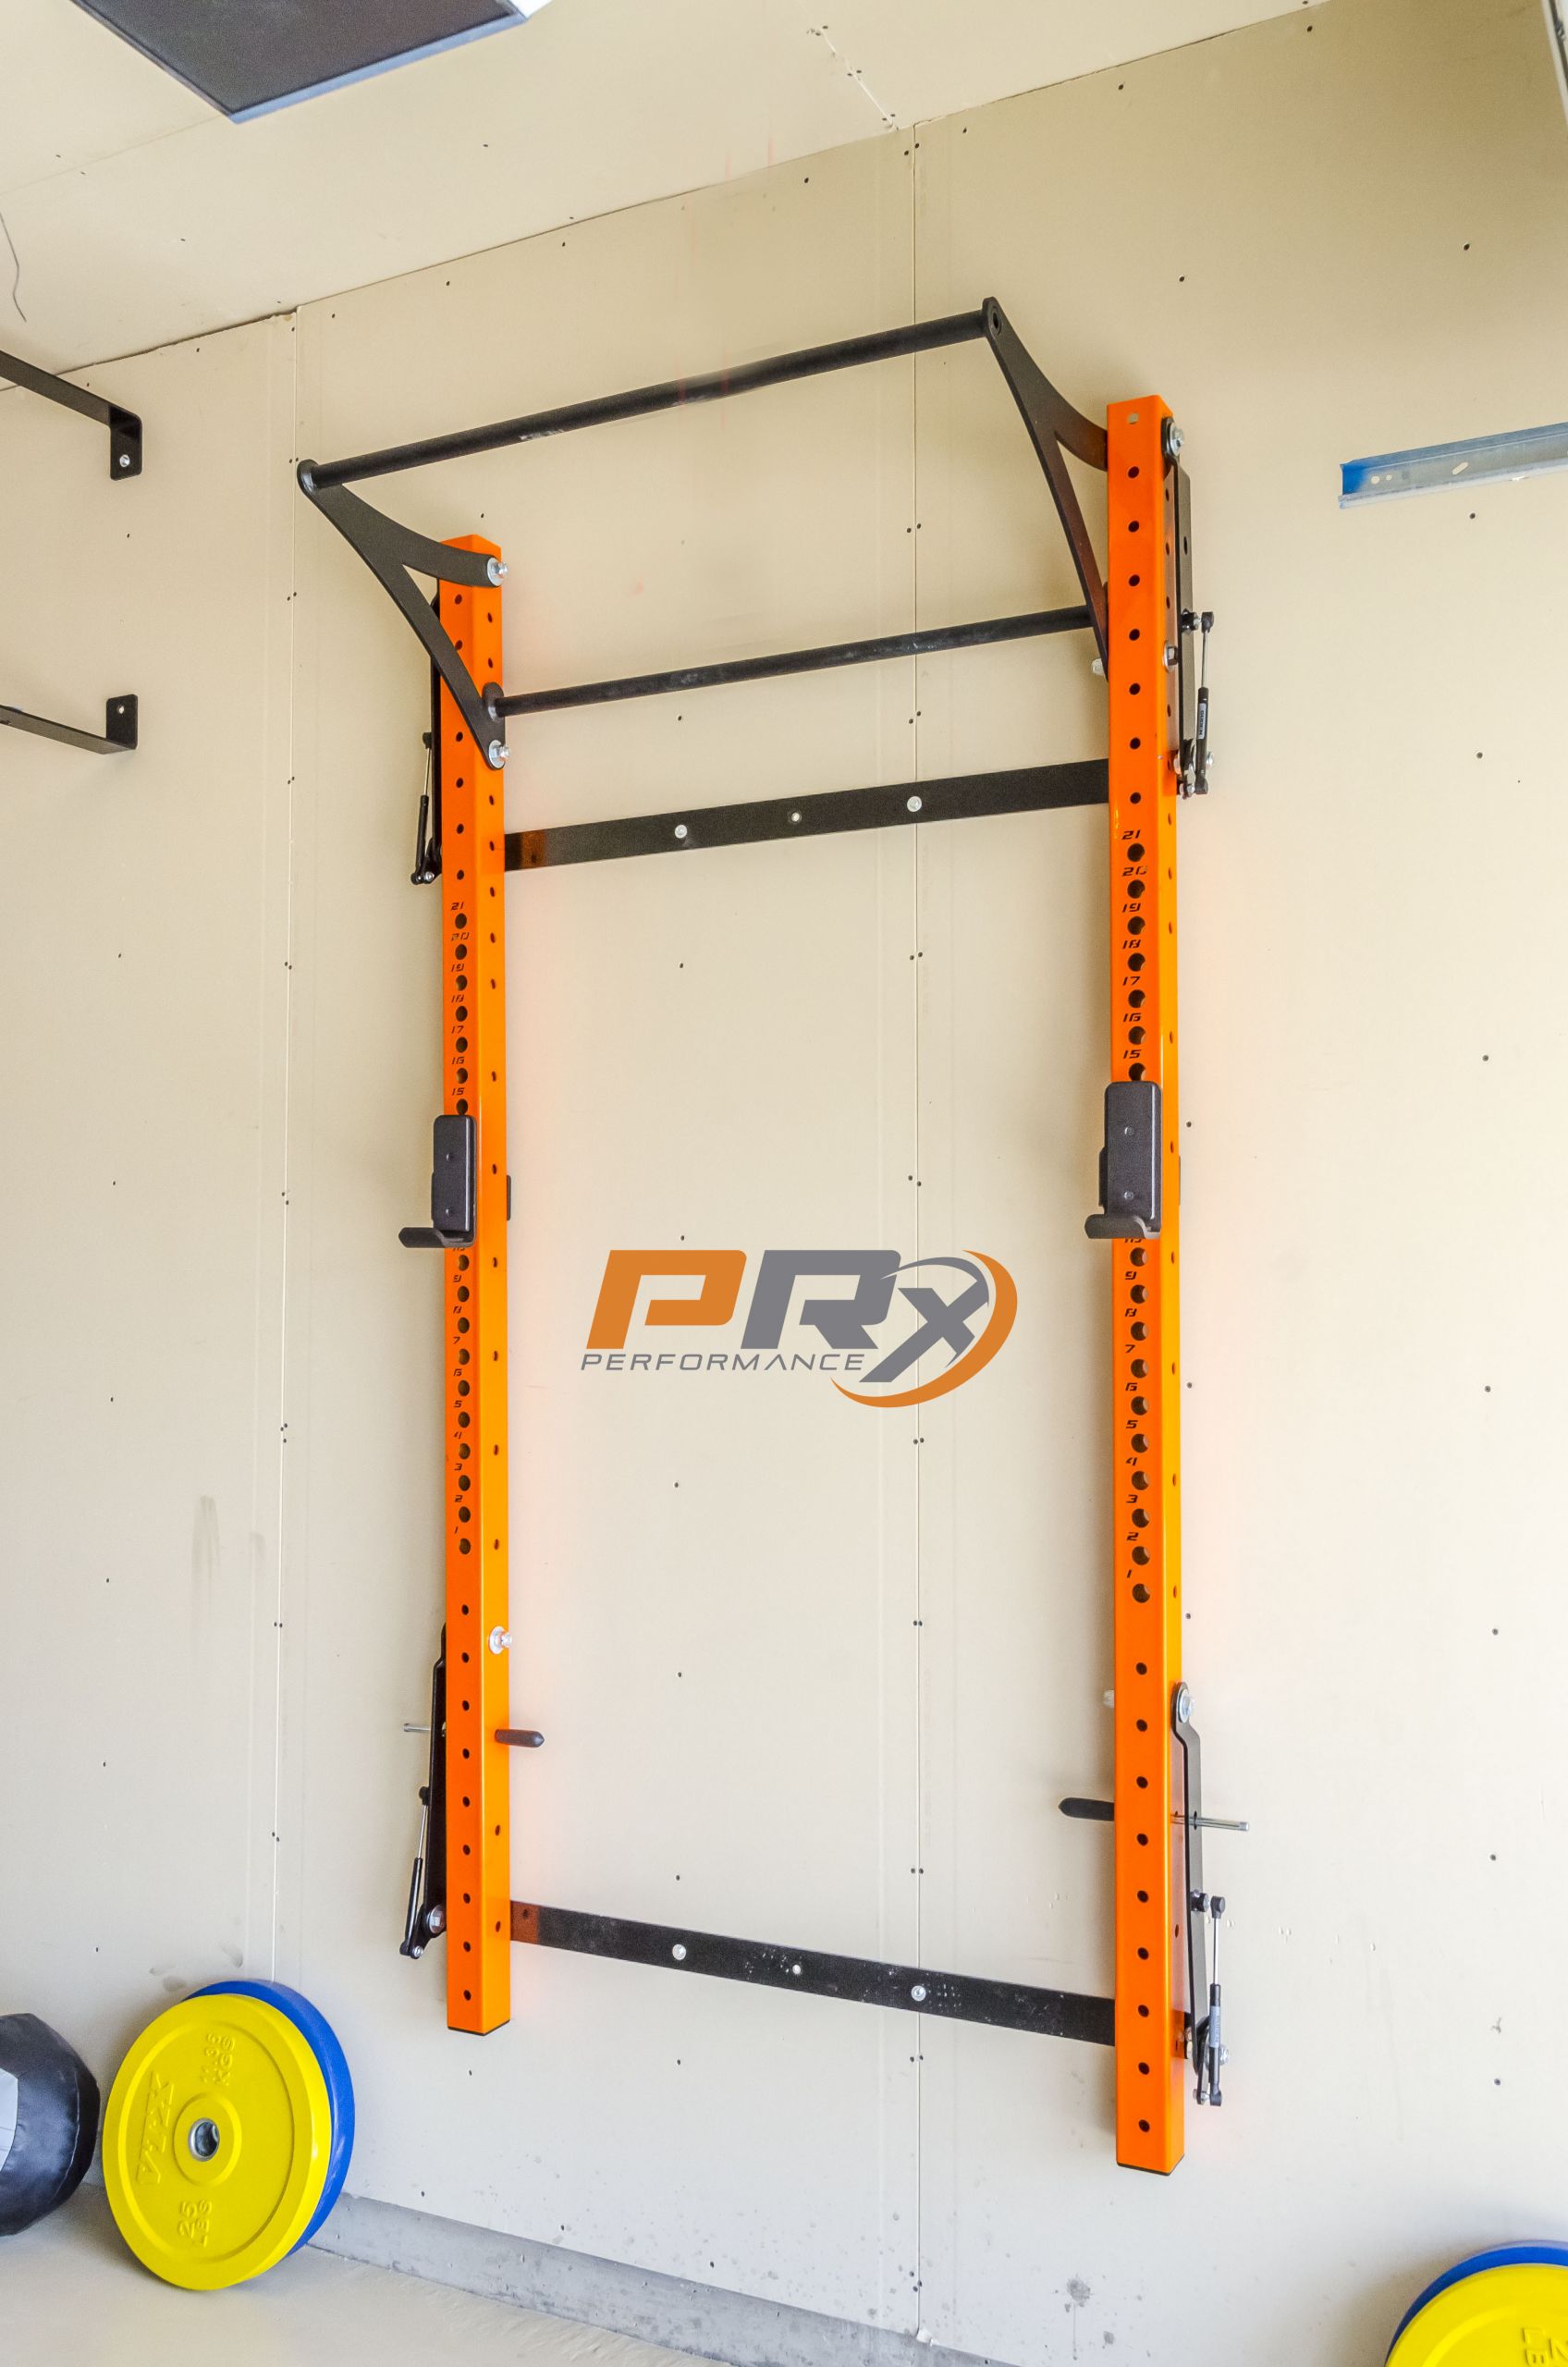 DIY Wall Mounted Squat Rack
 The Space Saving Squat Rack all folded up and out of the